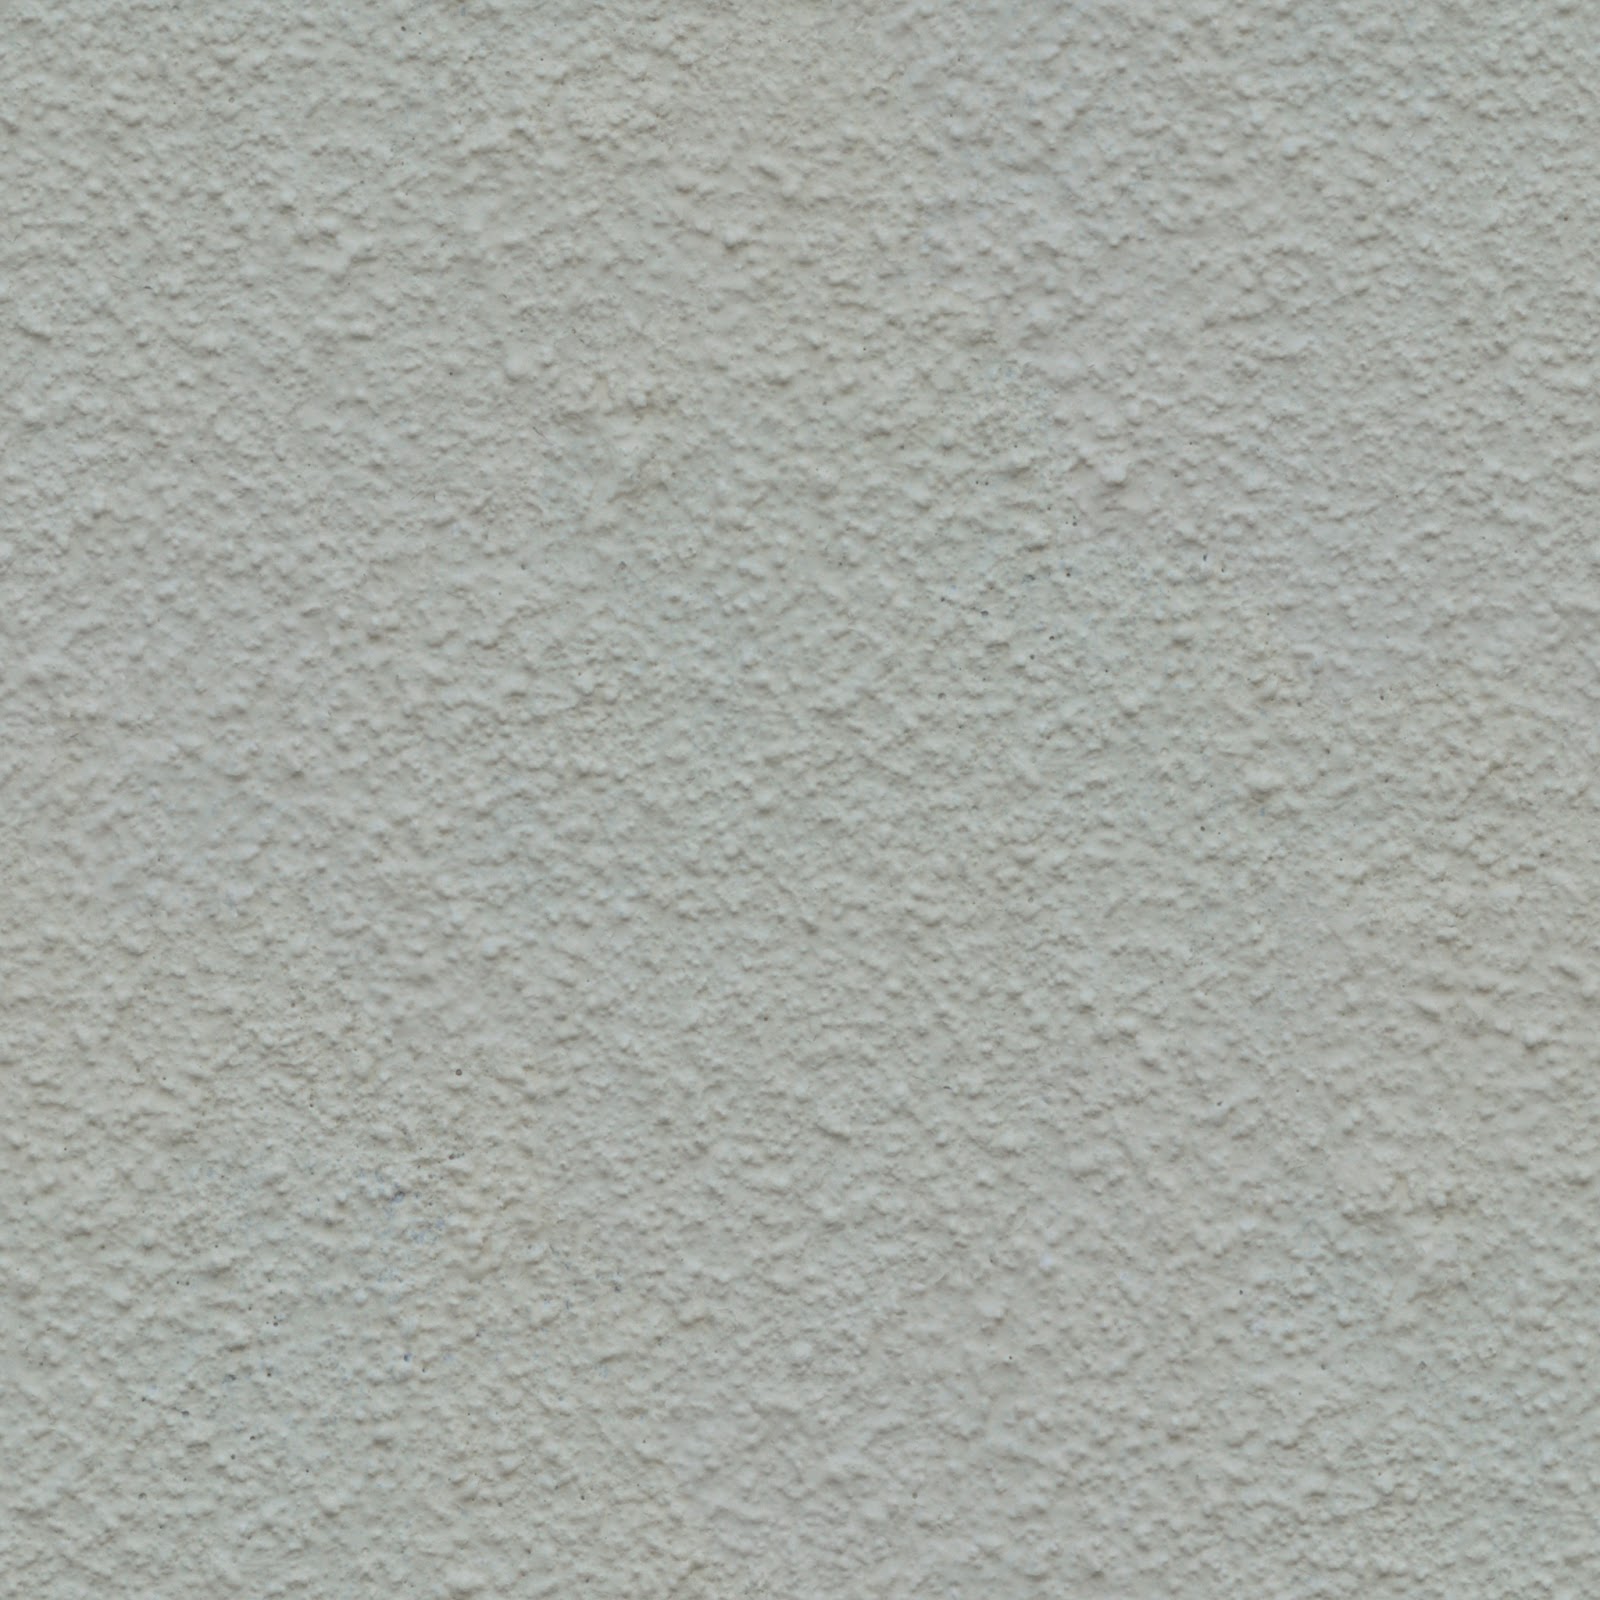 White stucco plaster wall paper seamless texture ver4 2048x2048